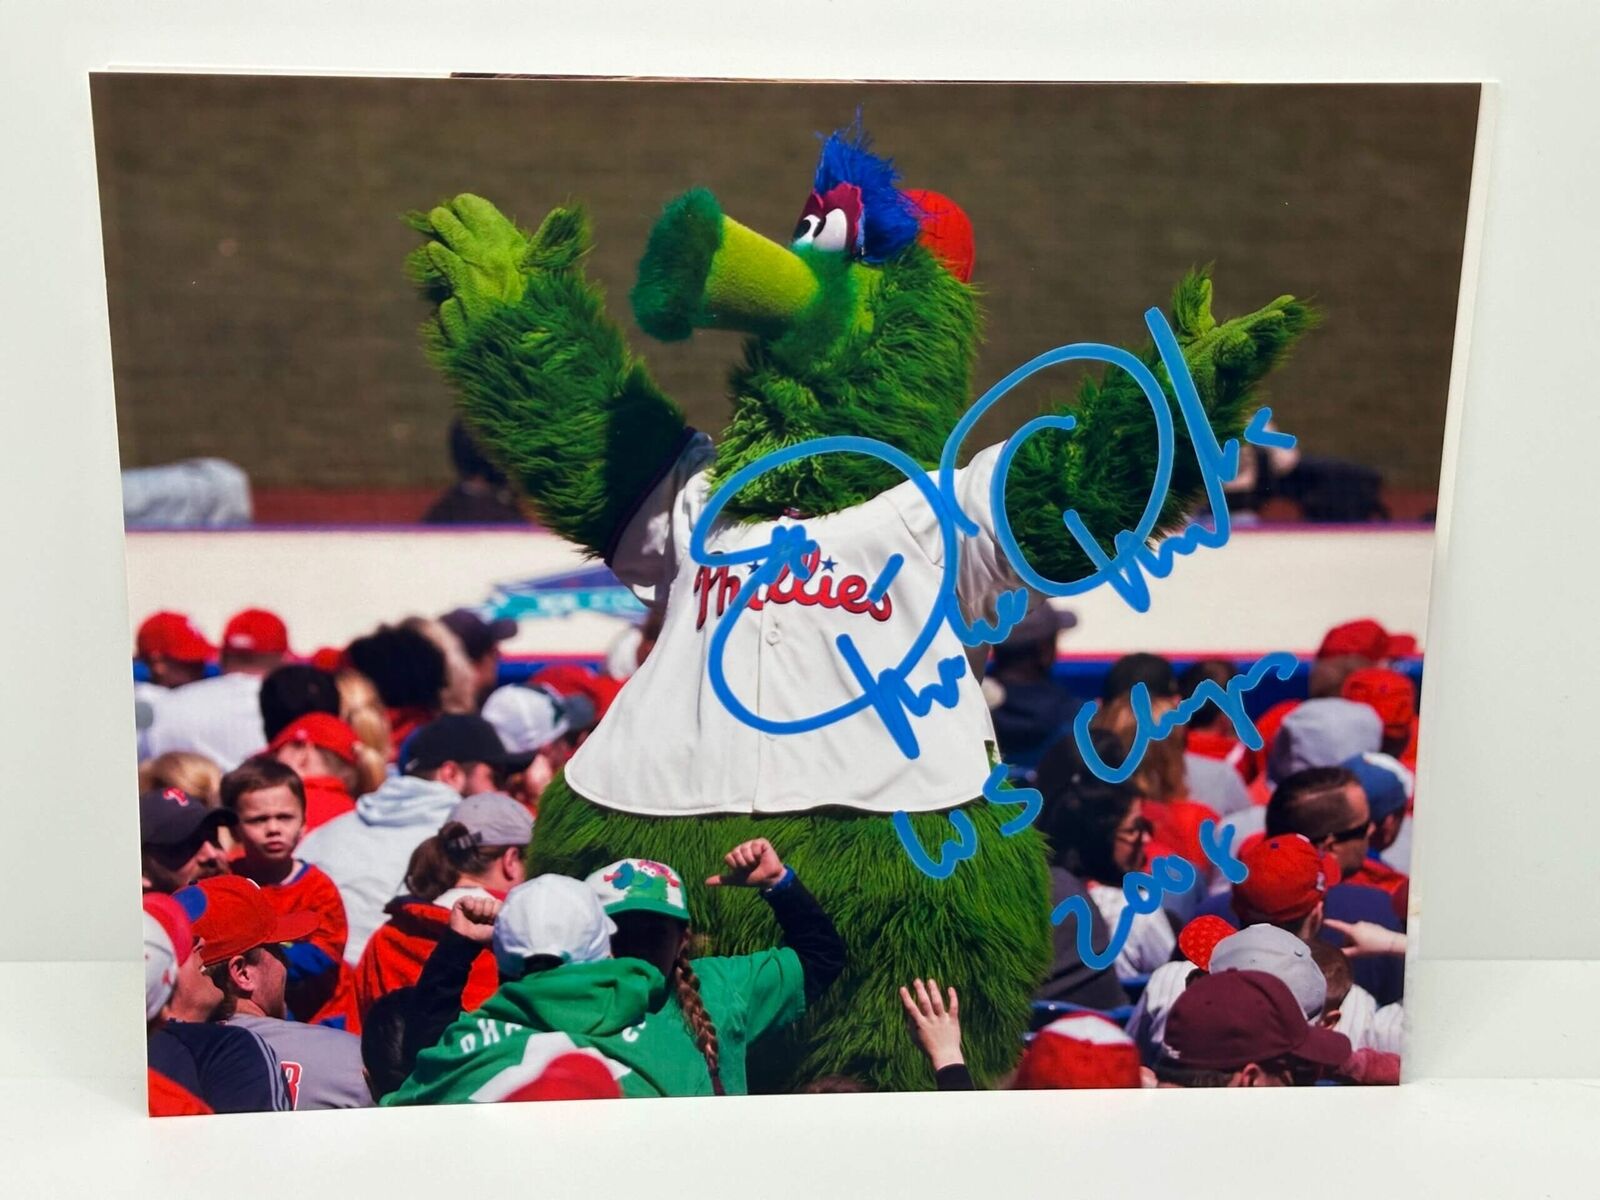 Philly Phanatic Inscribed Signed Autographed Photo Authentic 8X10 COA